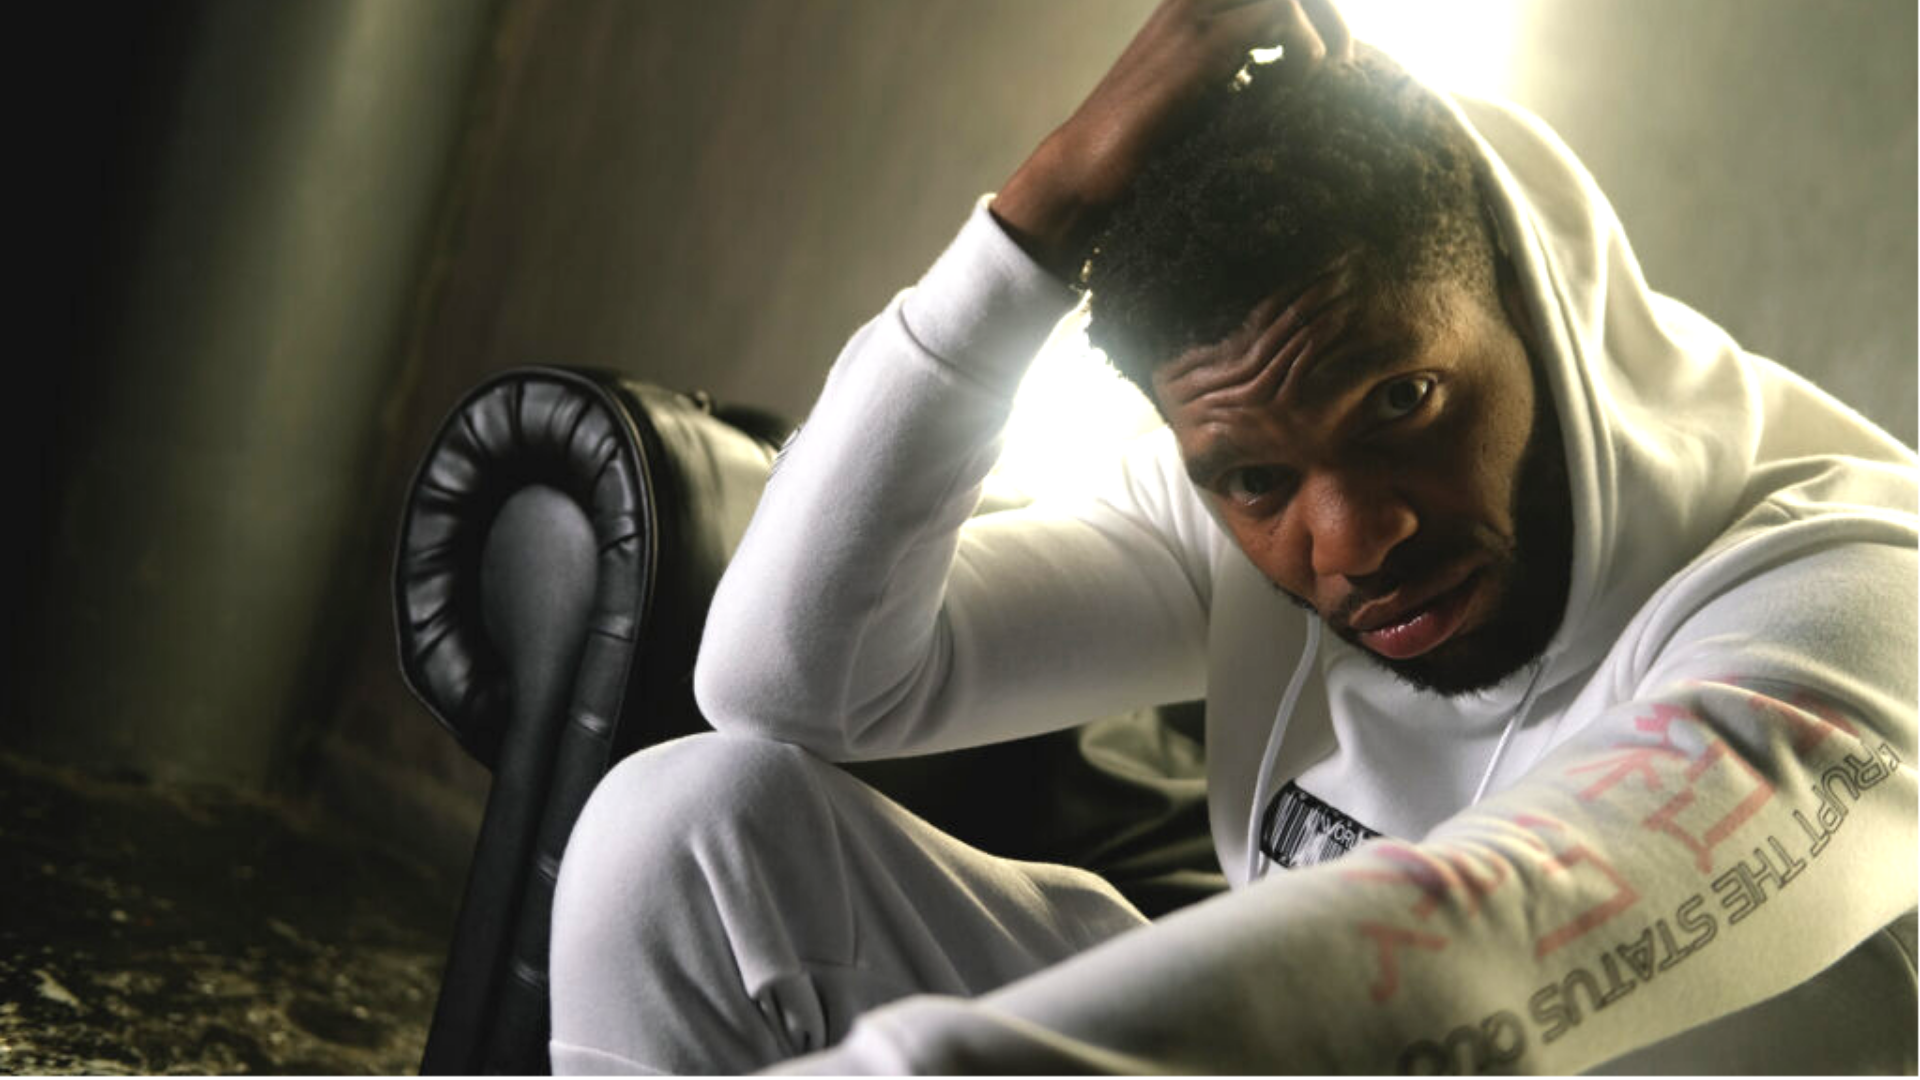 Loaded Lux Drops Nft Called 'Birth Of The Grey Hoodie'